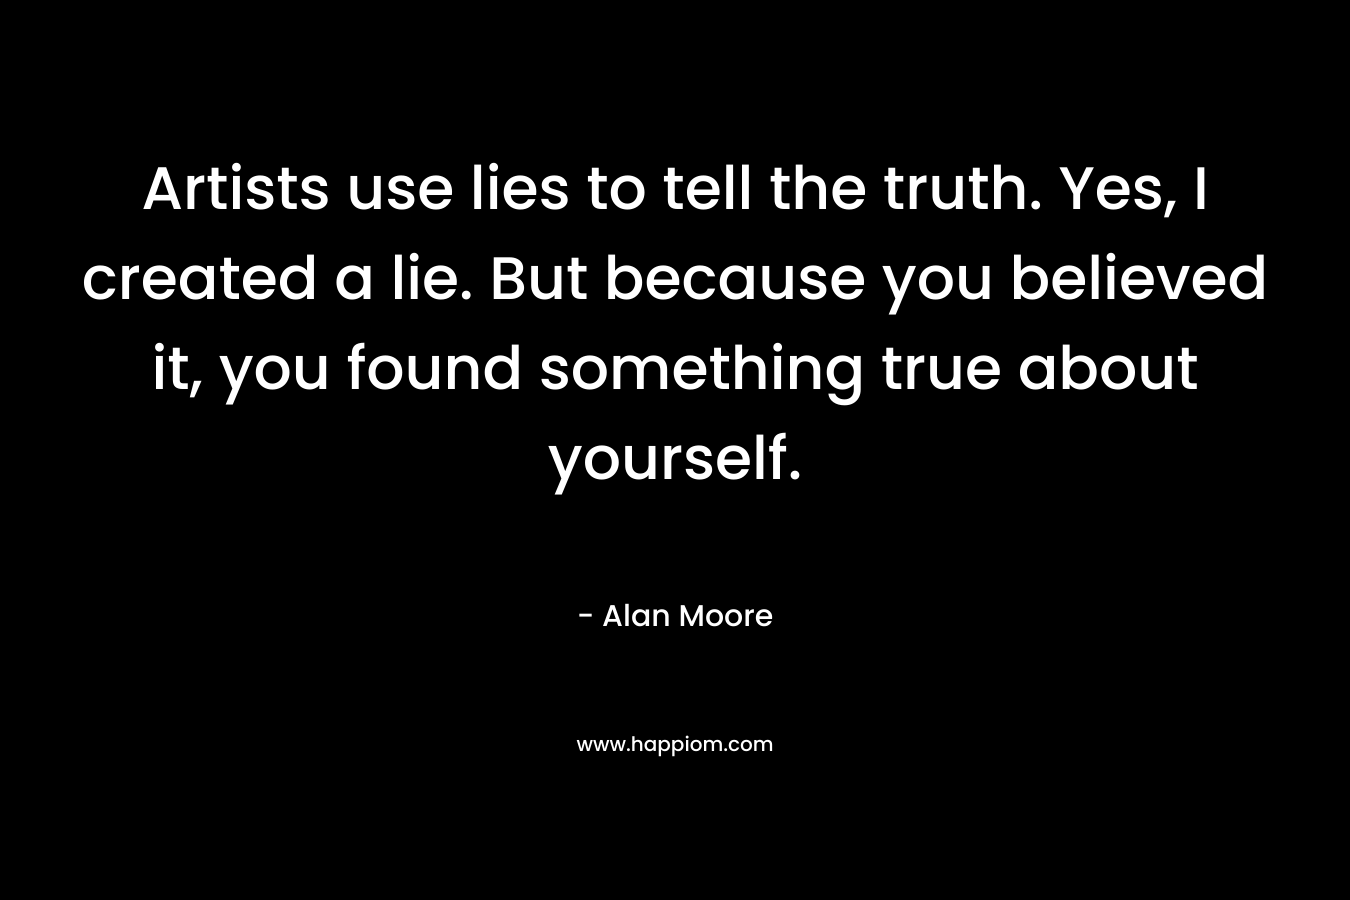 Artists use lies to tell the truth. Yes, I created a lie. But because you believed it, you found something true about yourself. – Alan Moore